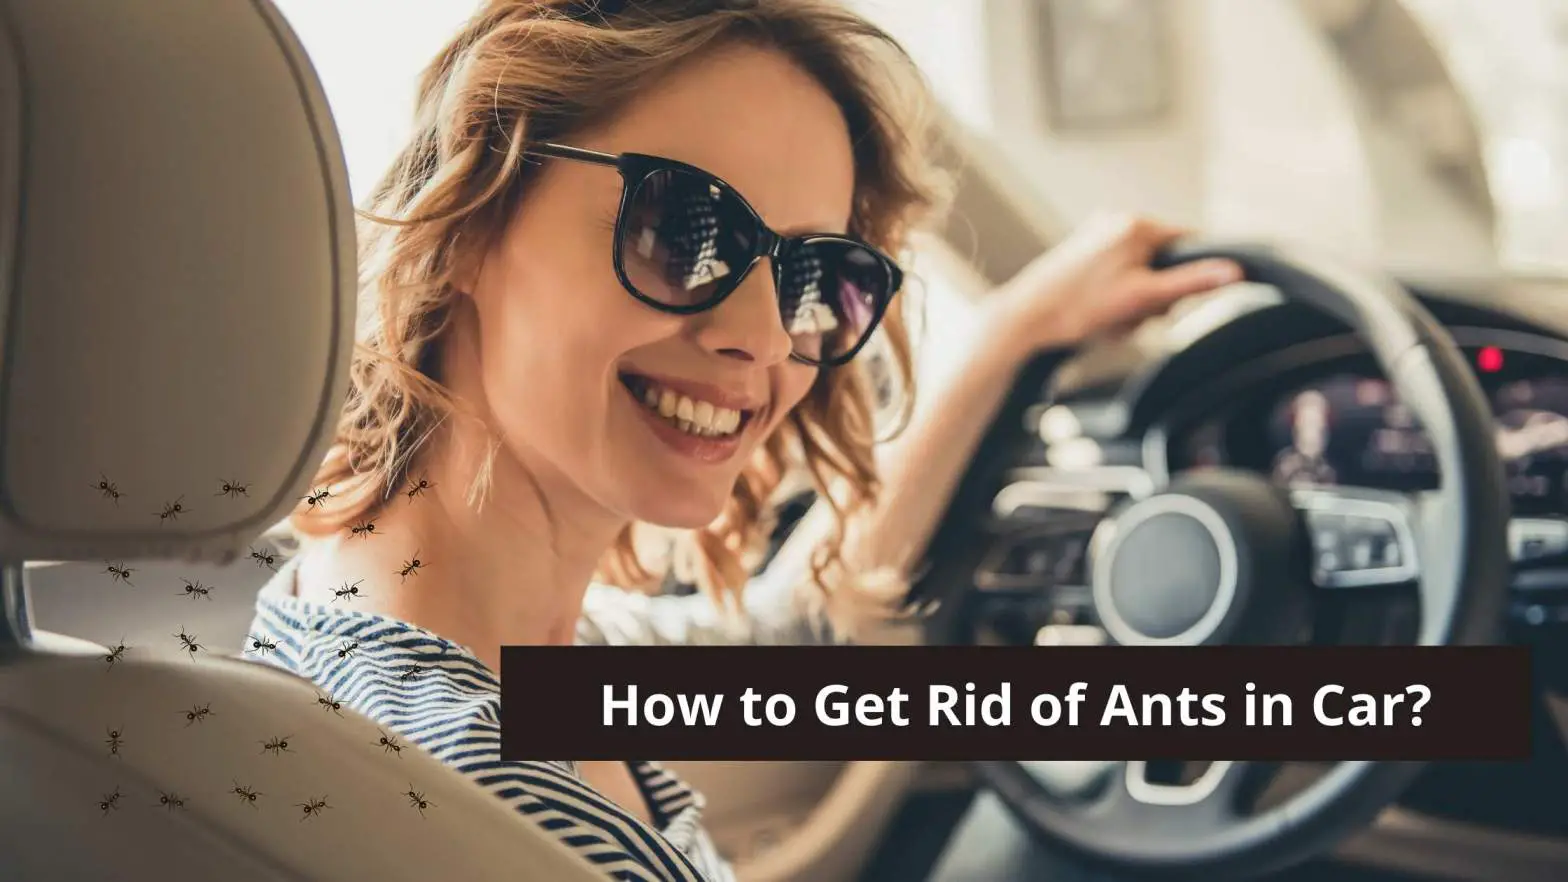 How to Get Rid of Ants in Car